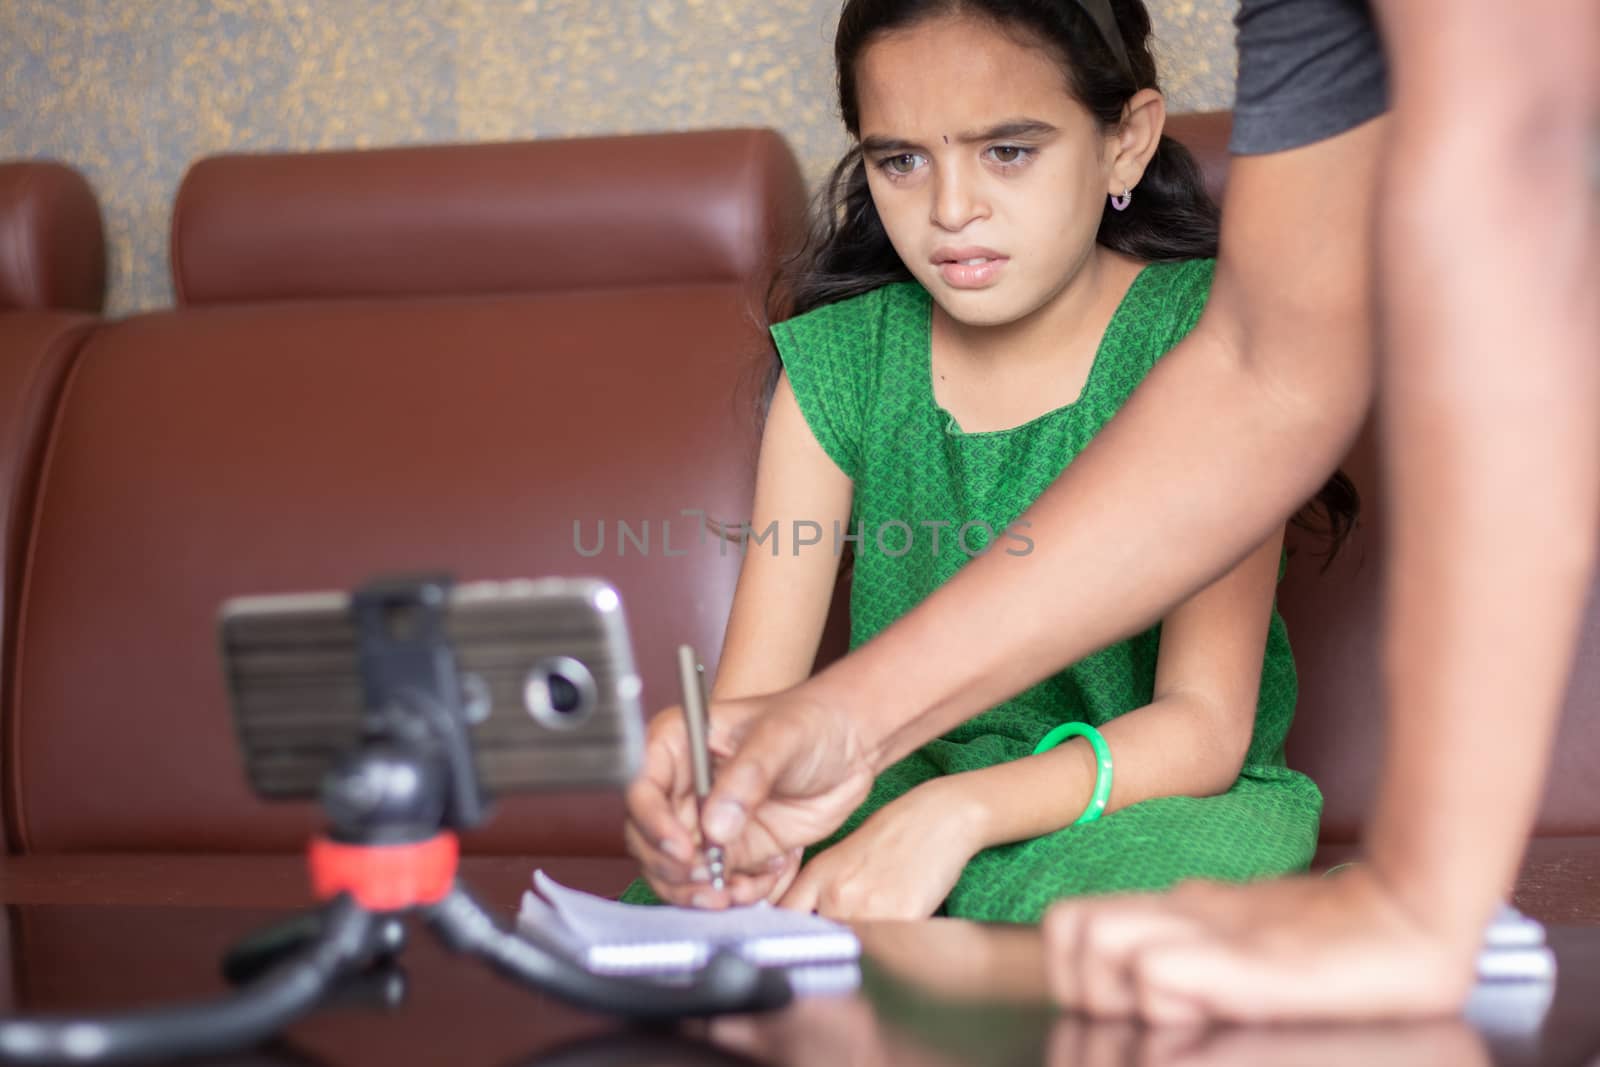 Father helping daughter by solving problem while studying the lesson from online class or e-learning - concept of Role of parents in supporting child during homeschooling, distance learning